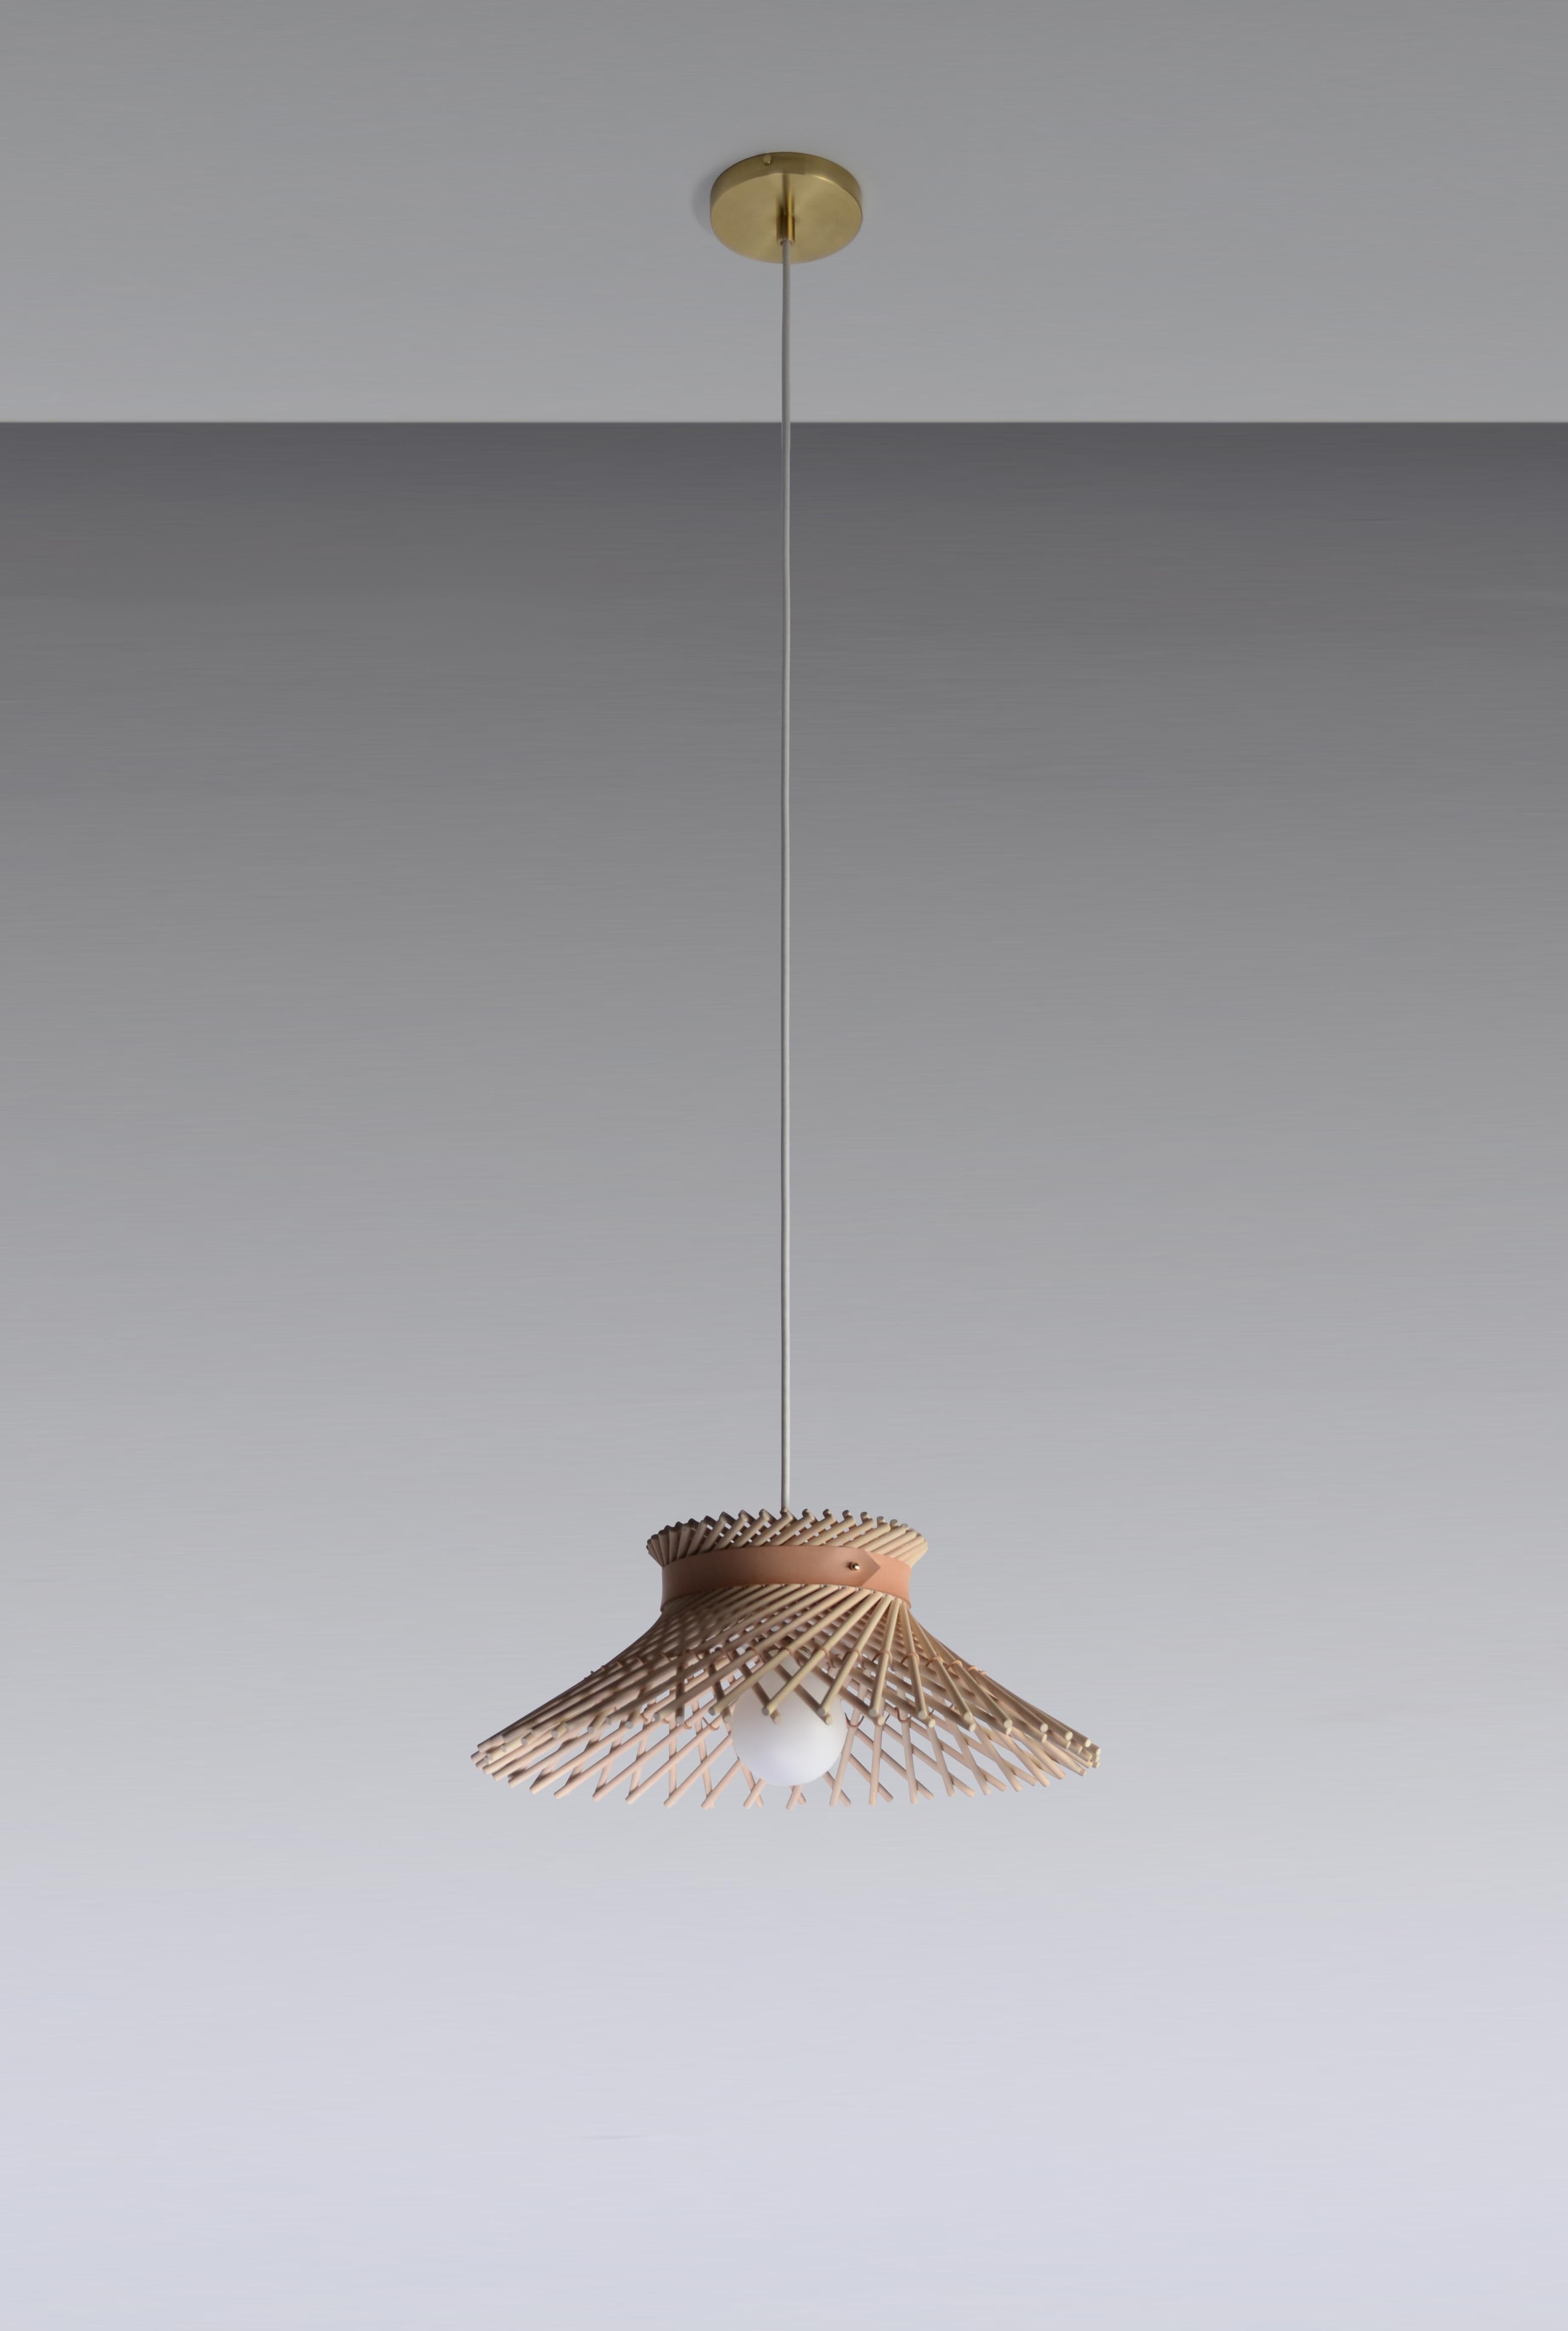 Mooda Bleached Maple pendant 6 by Indo Made
Dimensions: Ø 41.9 x H 17.8 cm (Suspension height is made to specification)
Materials: Bleached Maple, Mugla White Marble

All our lamps can be wired according to each country. If sold to the USA it